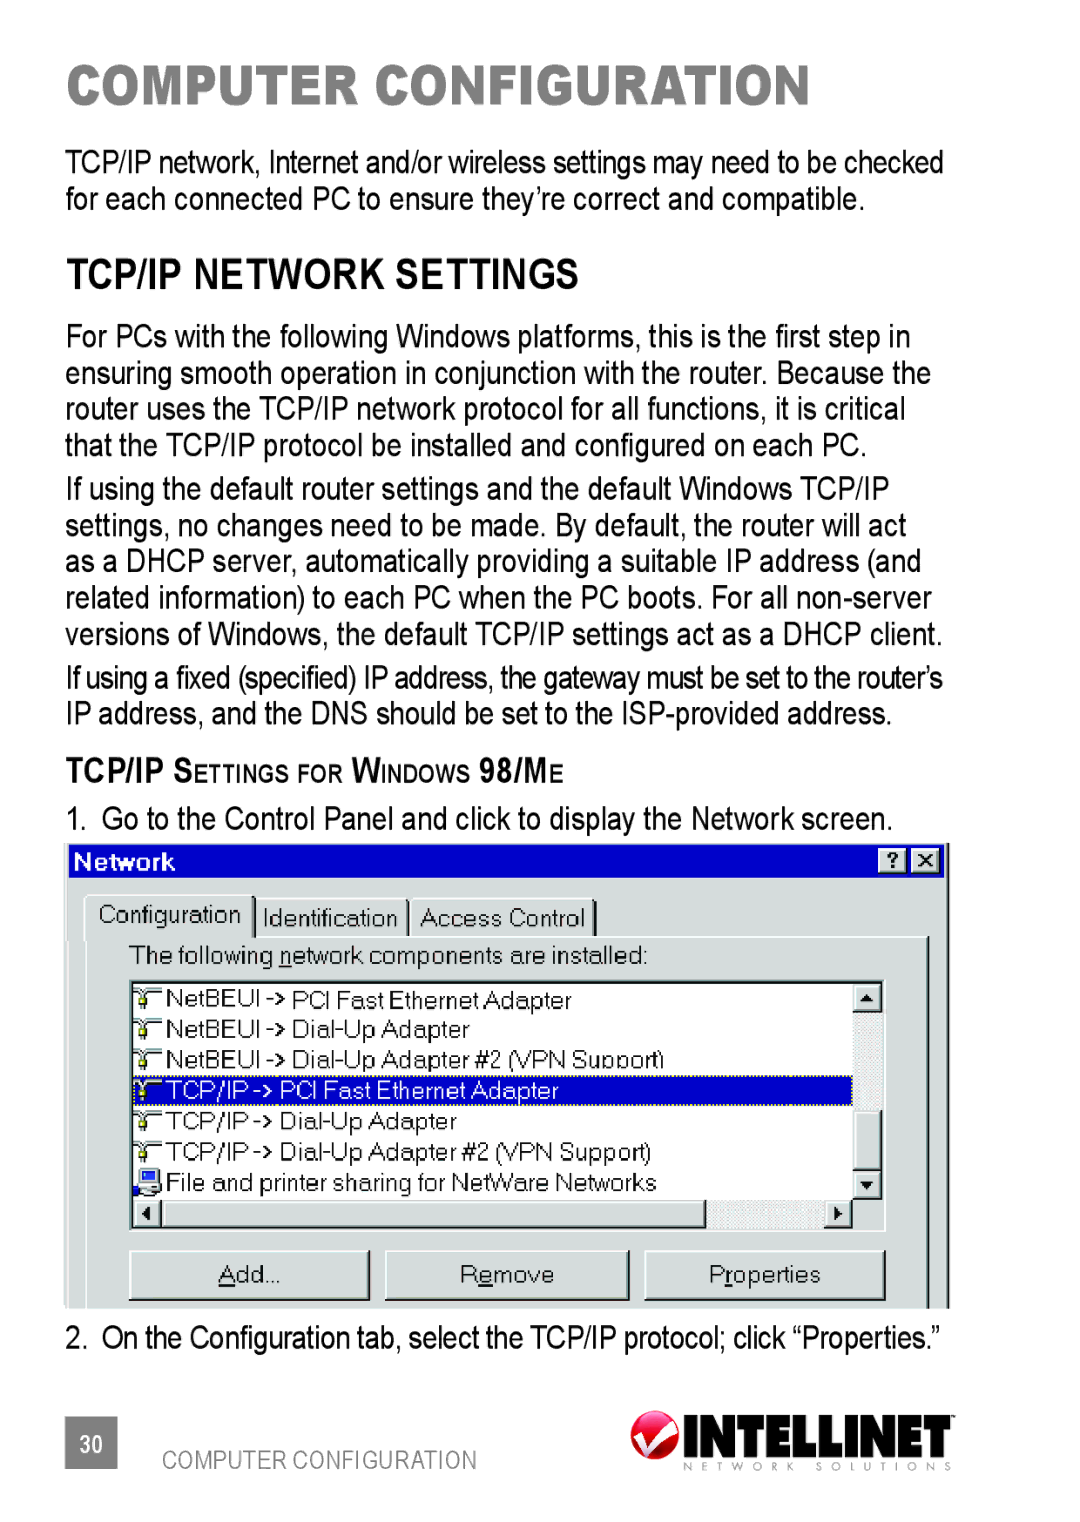 Intellinet Network Solutions 523875 user manual Computer configuration, Tcp/ip network settings 